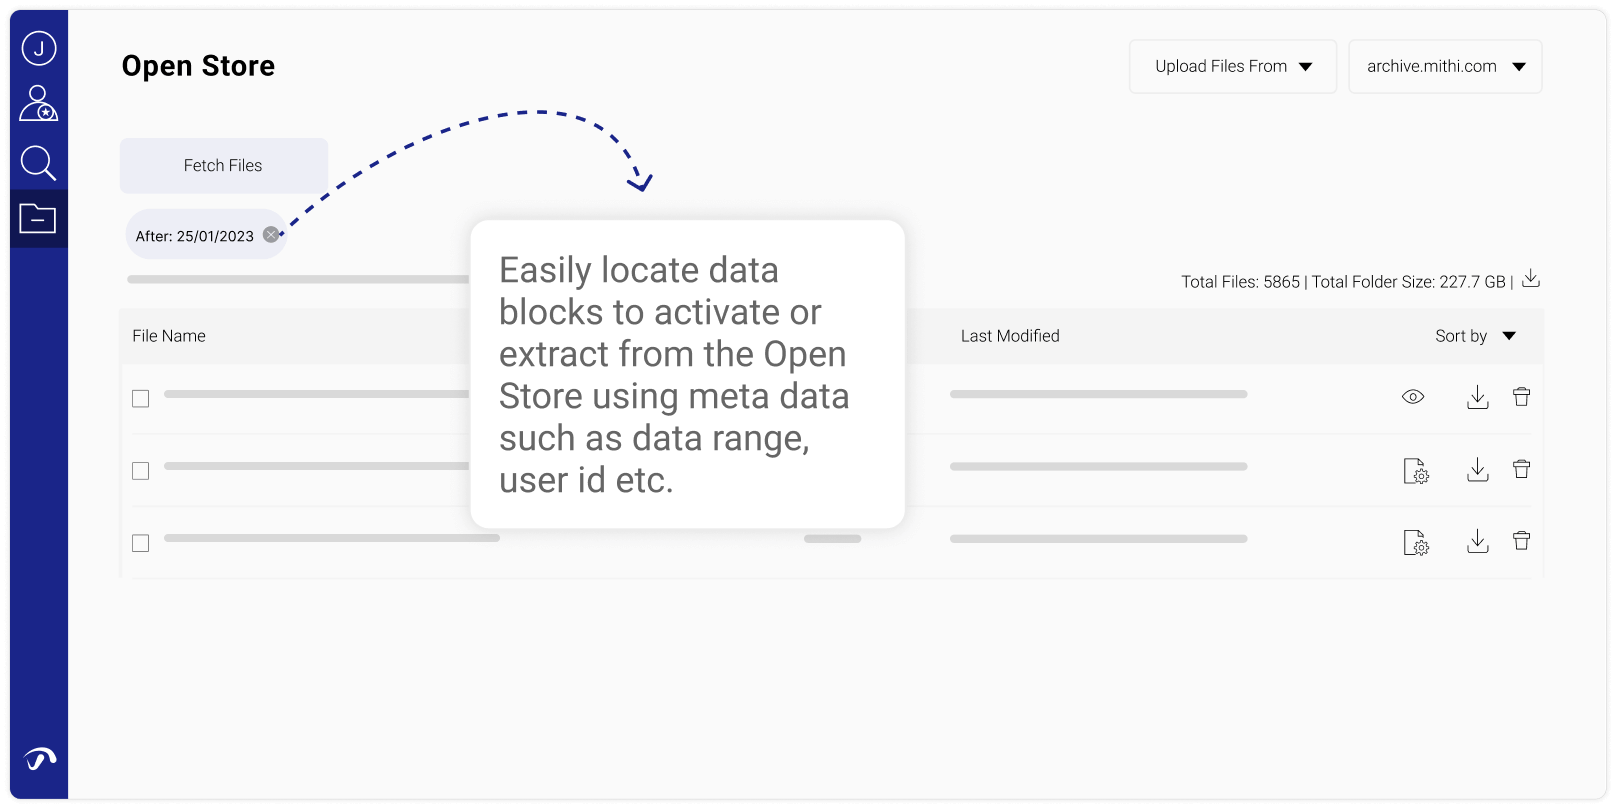 Easily locate data blocks to activate or extract from the inactive store using meta data such as data range, user id etc.